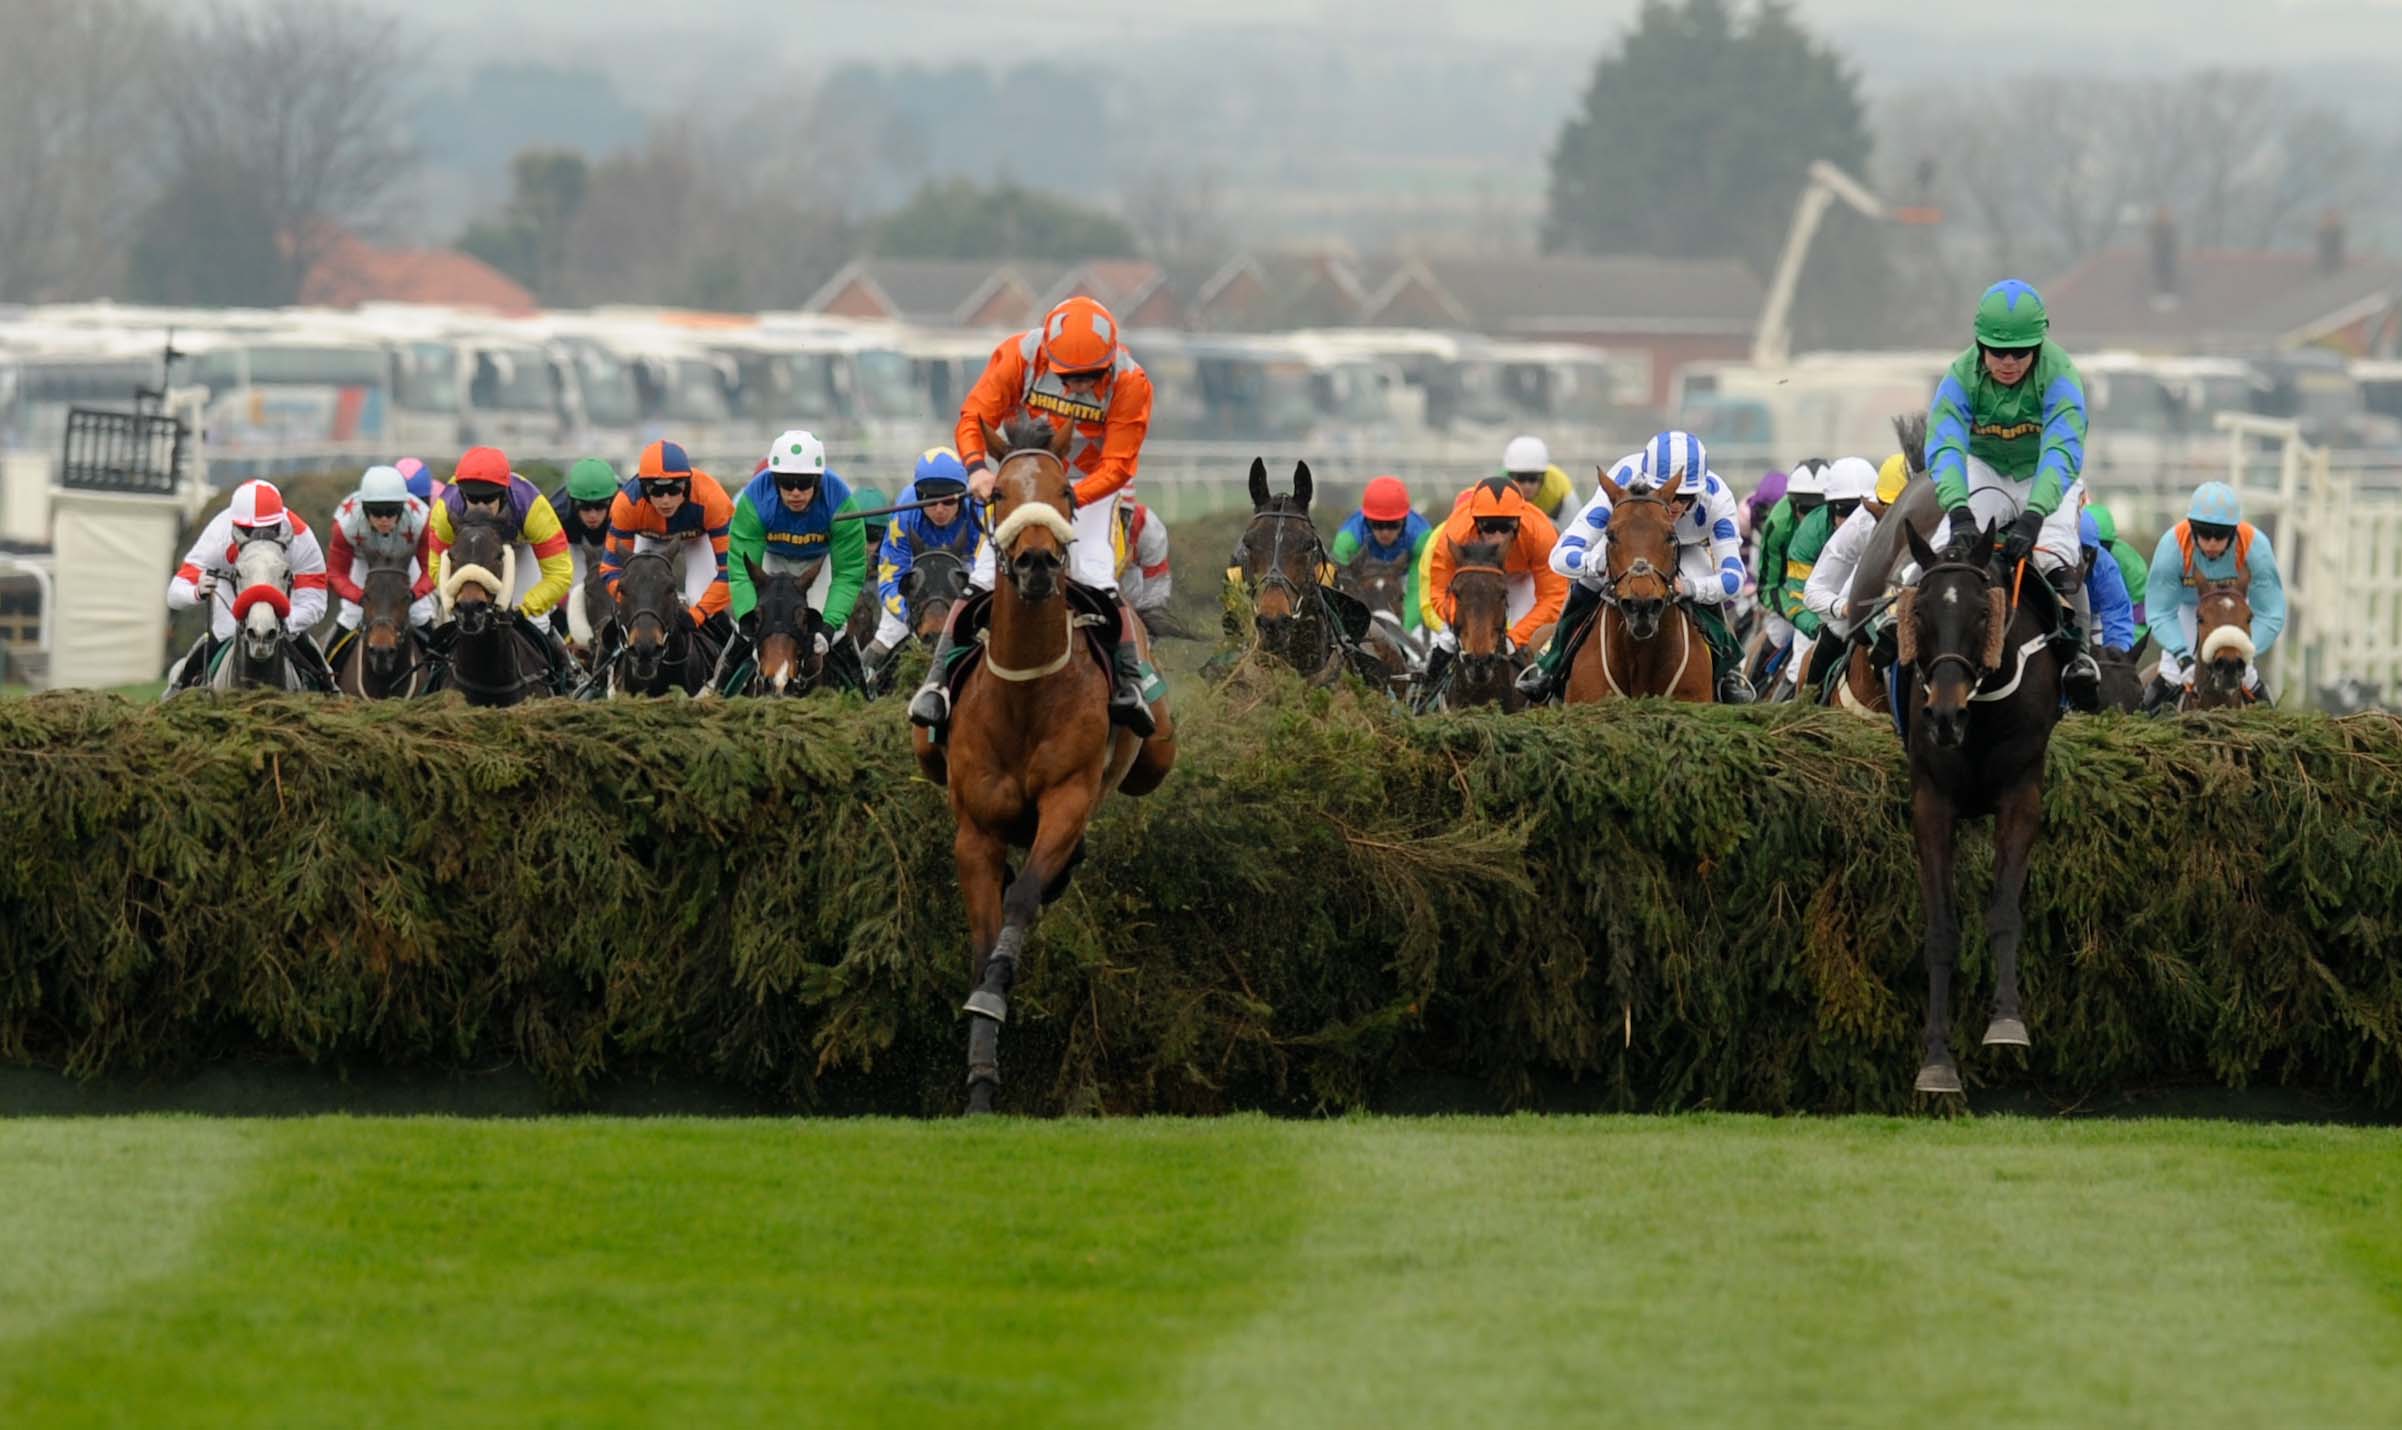 Grand National winner defends race following the death of two horses